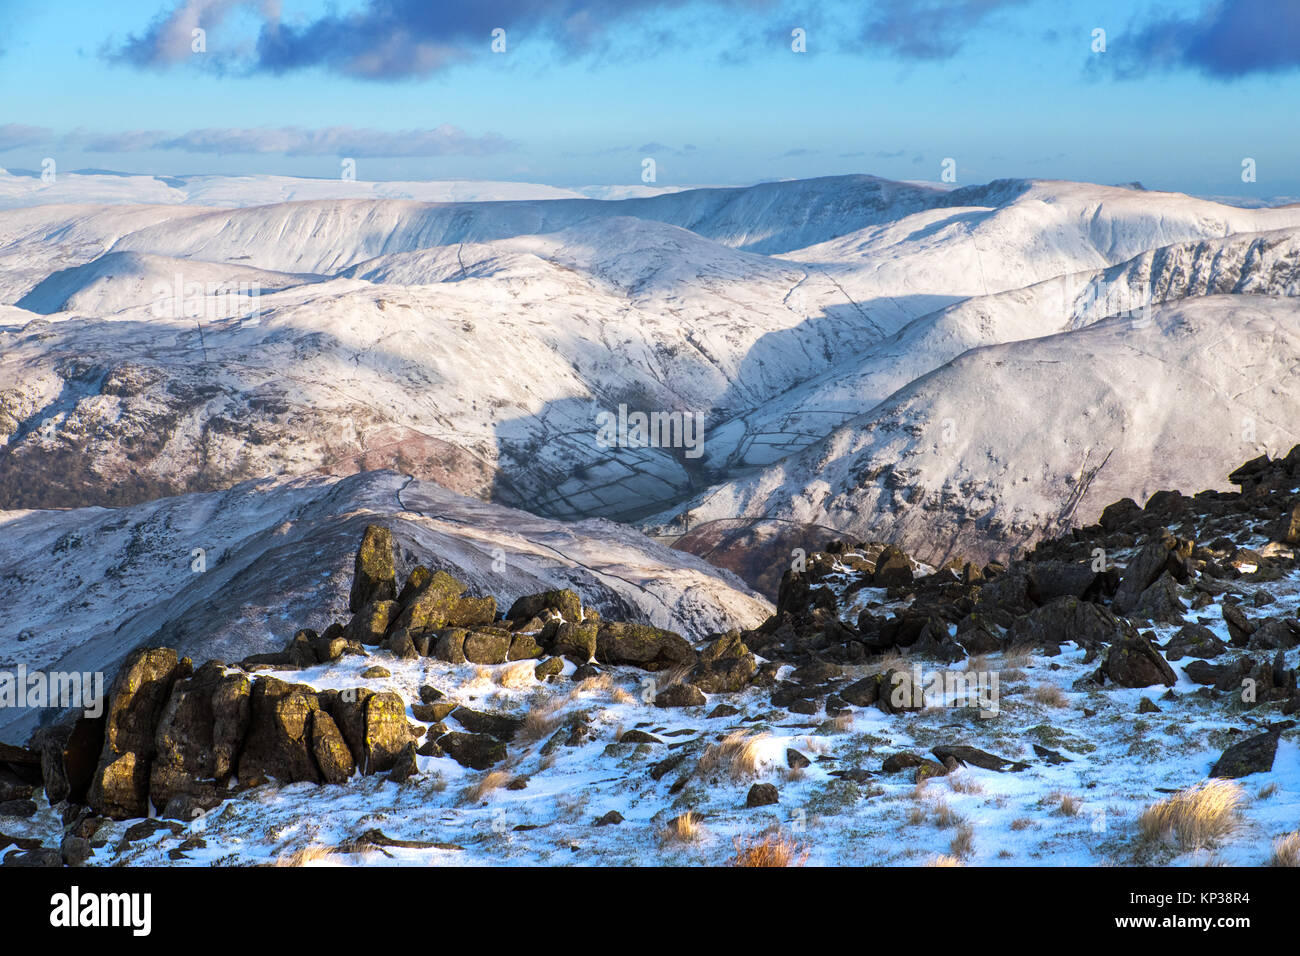 The Eastern Fells - Hayeswater,The Knott,High Street,High Raise, Gray Crag, Rampsgill Head - in winter, viewed freom St Sunday Crag. Lake District Stock Photo